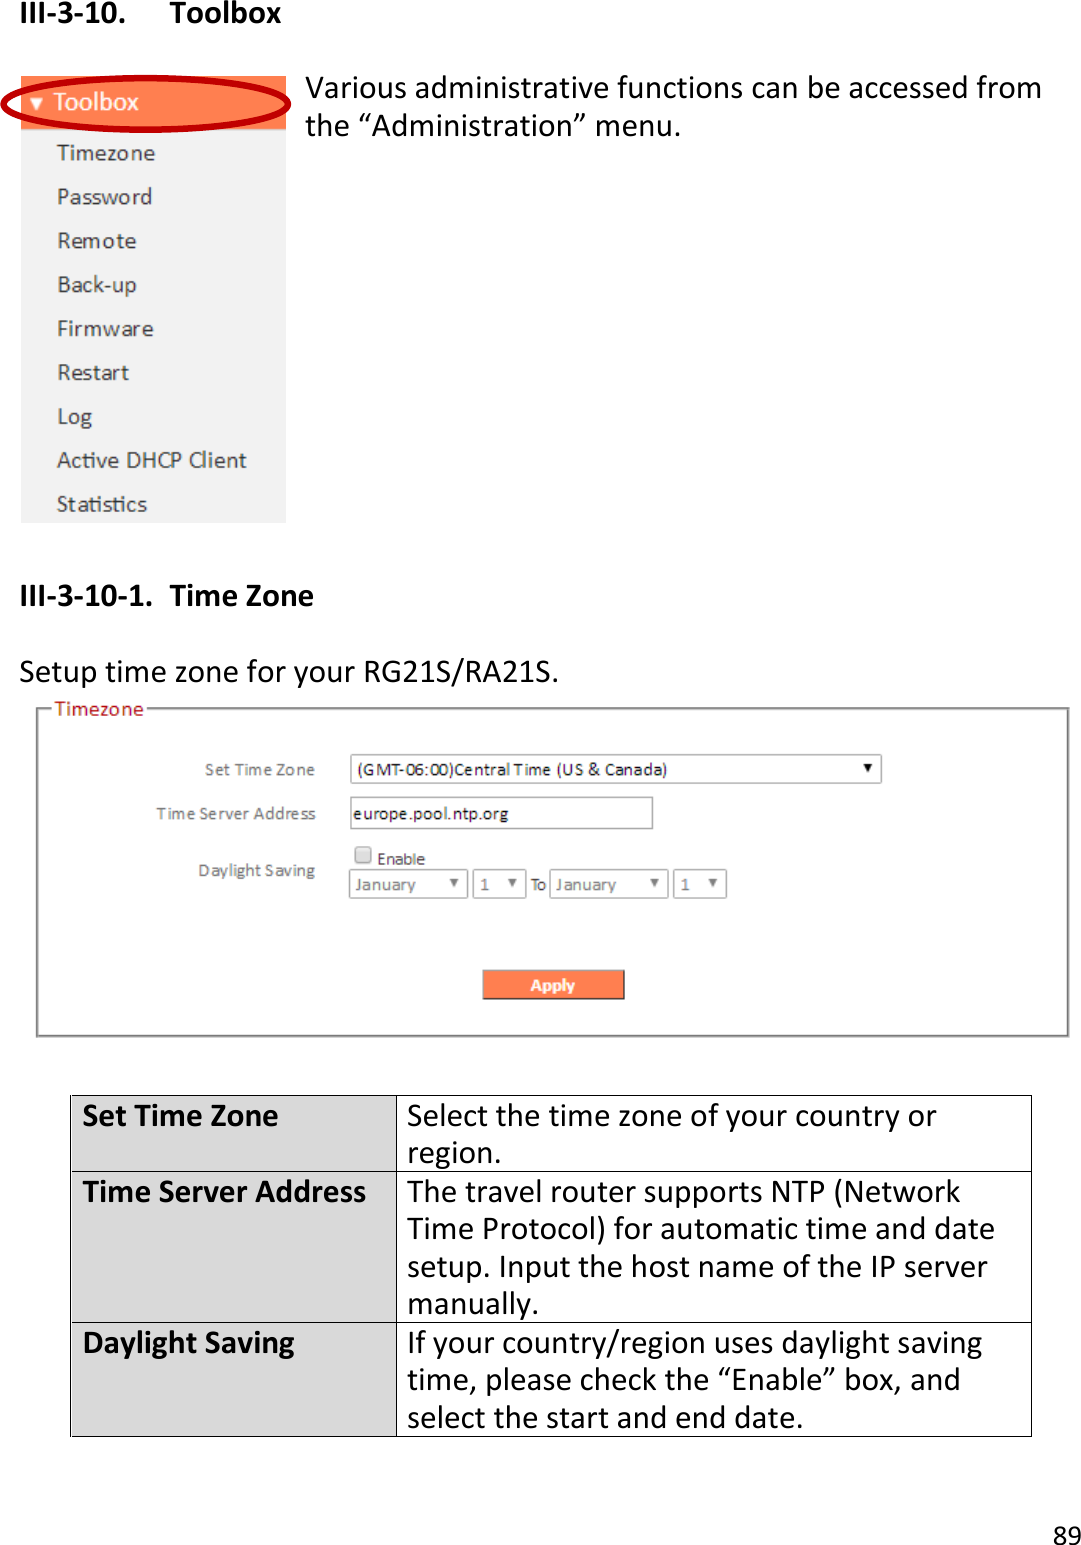 89  III-3-10.  Toolbox  Various administrative functions can be accessed from the “Administration” menu.            III-3-10-1.  Time Zone  Setup time zone for your RG21S/RA21S.   Set Time Zone Select the time zone of your country or region. Time Server Address The travel router supports NTP (Network Time Protocol) for automatic time and date setup. Input the host name of the IP server manually. Daylight Saving If your country/region uses daylight saving time, please check the “Enable” box, and select the start and end date.  